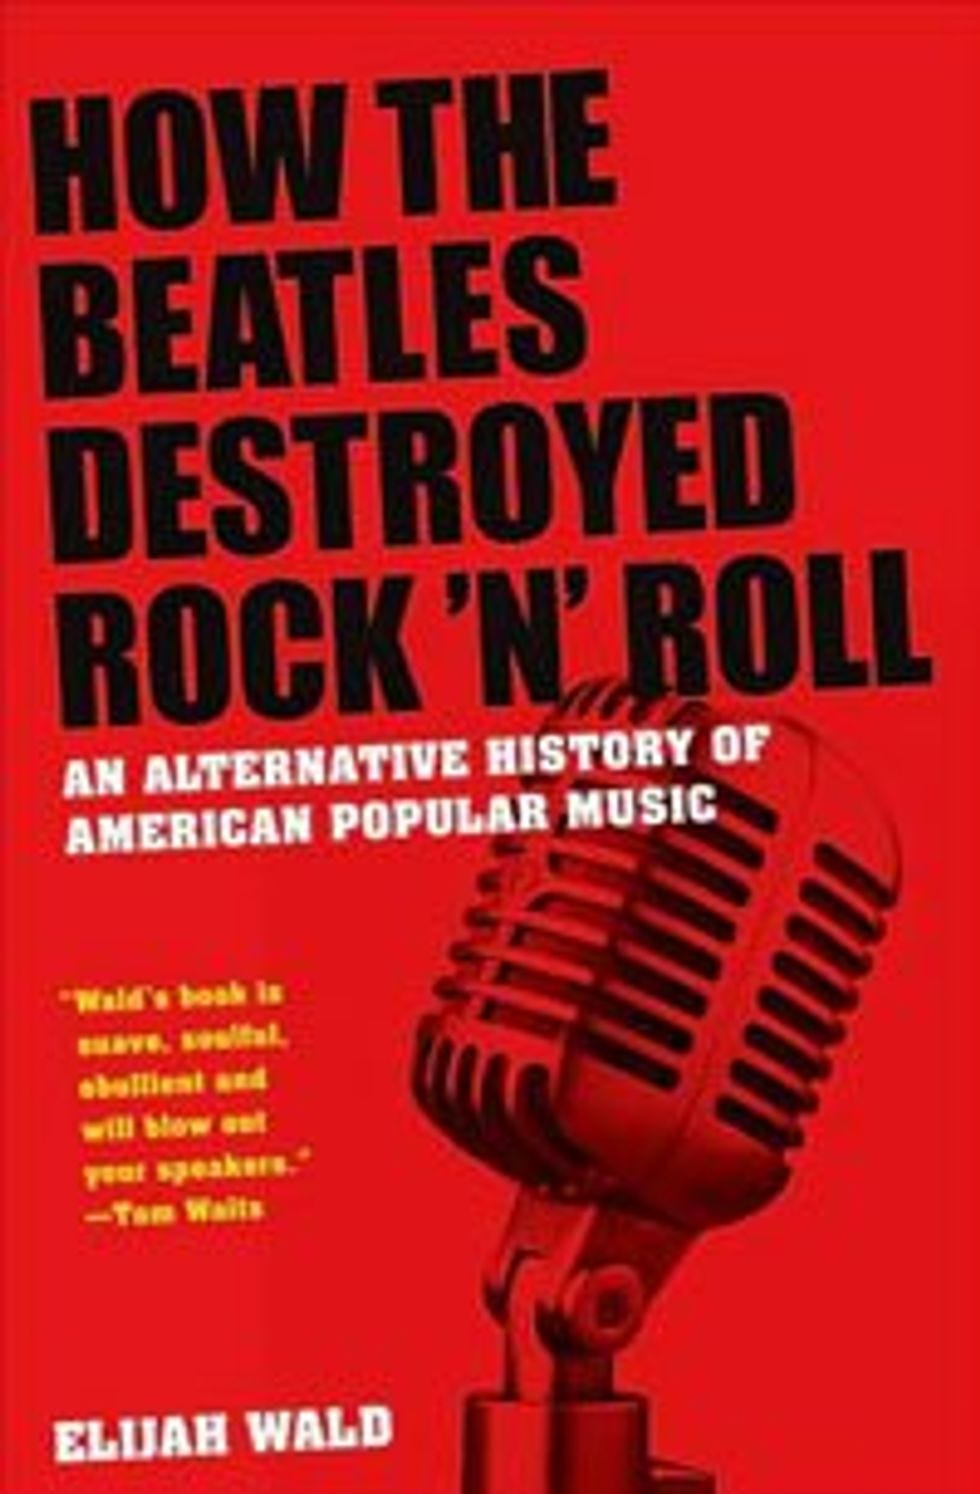 How the Beatles Destroyed Rock 'n' Roll by Elijah Wald - PopMatters